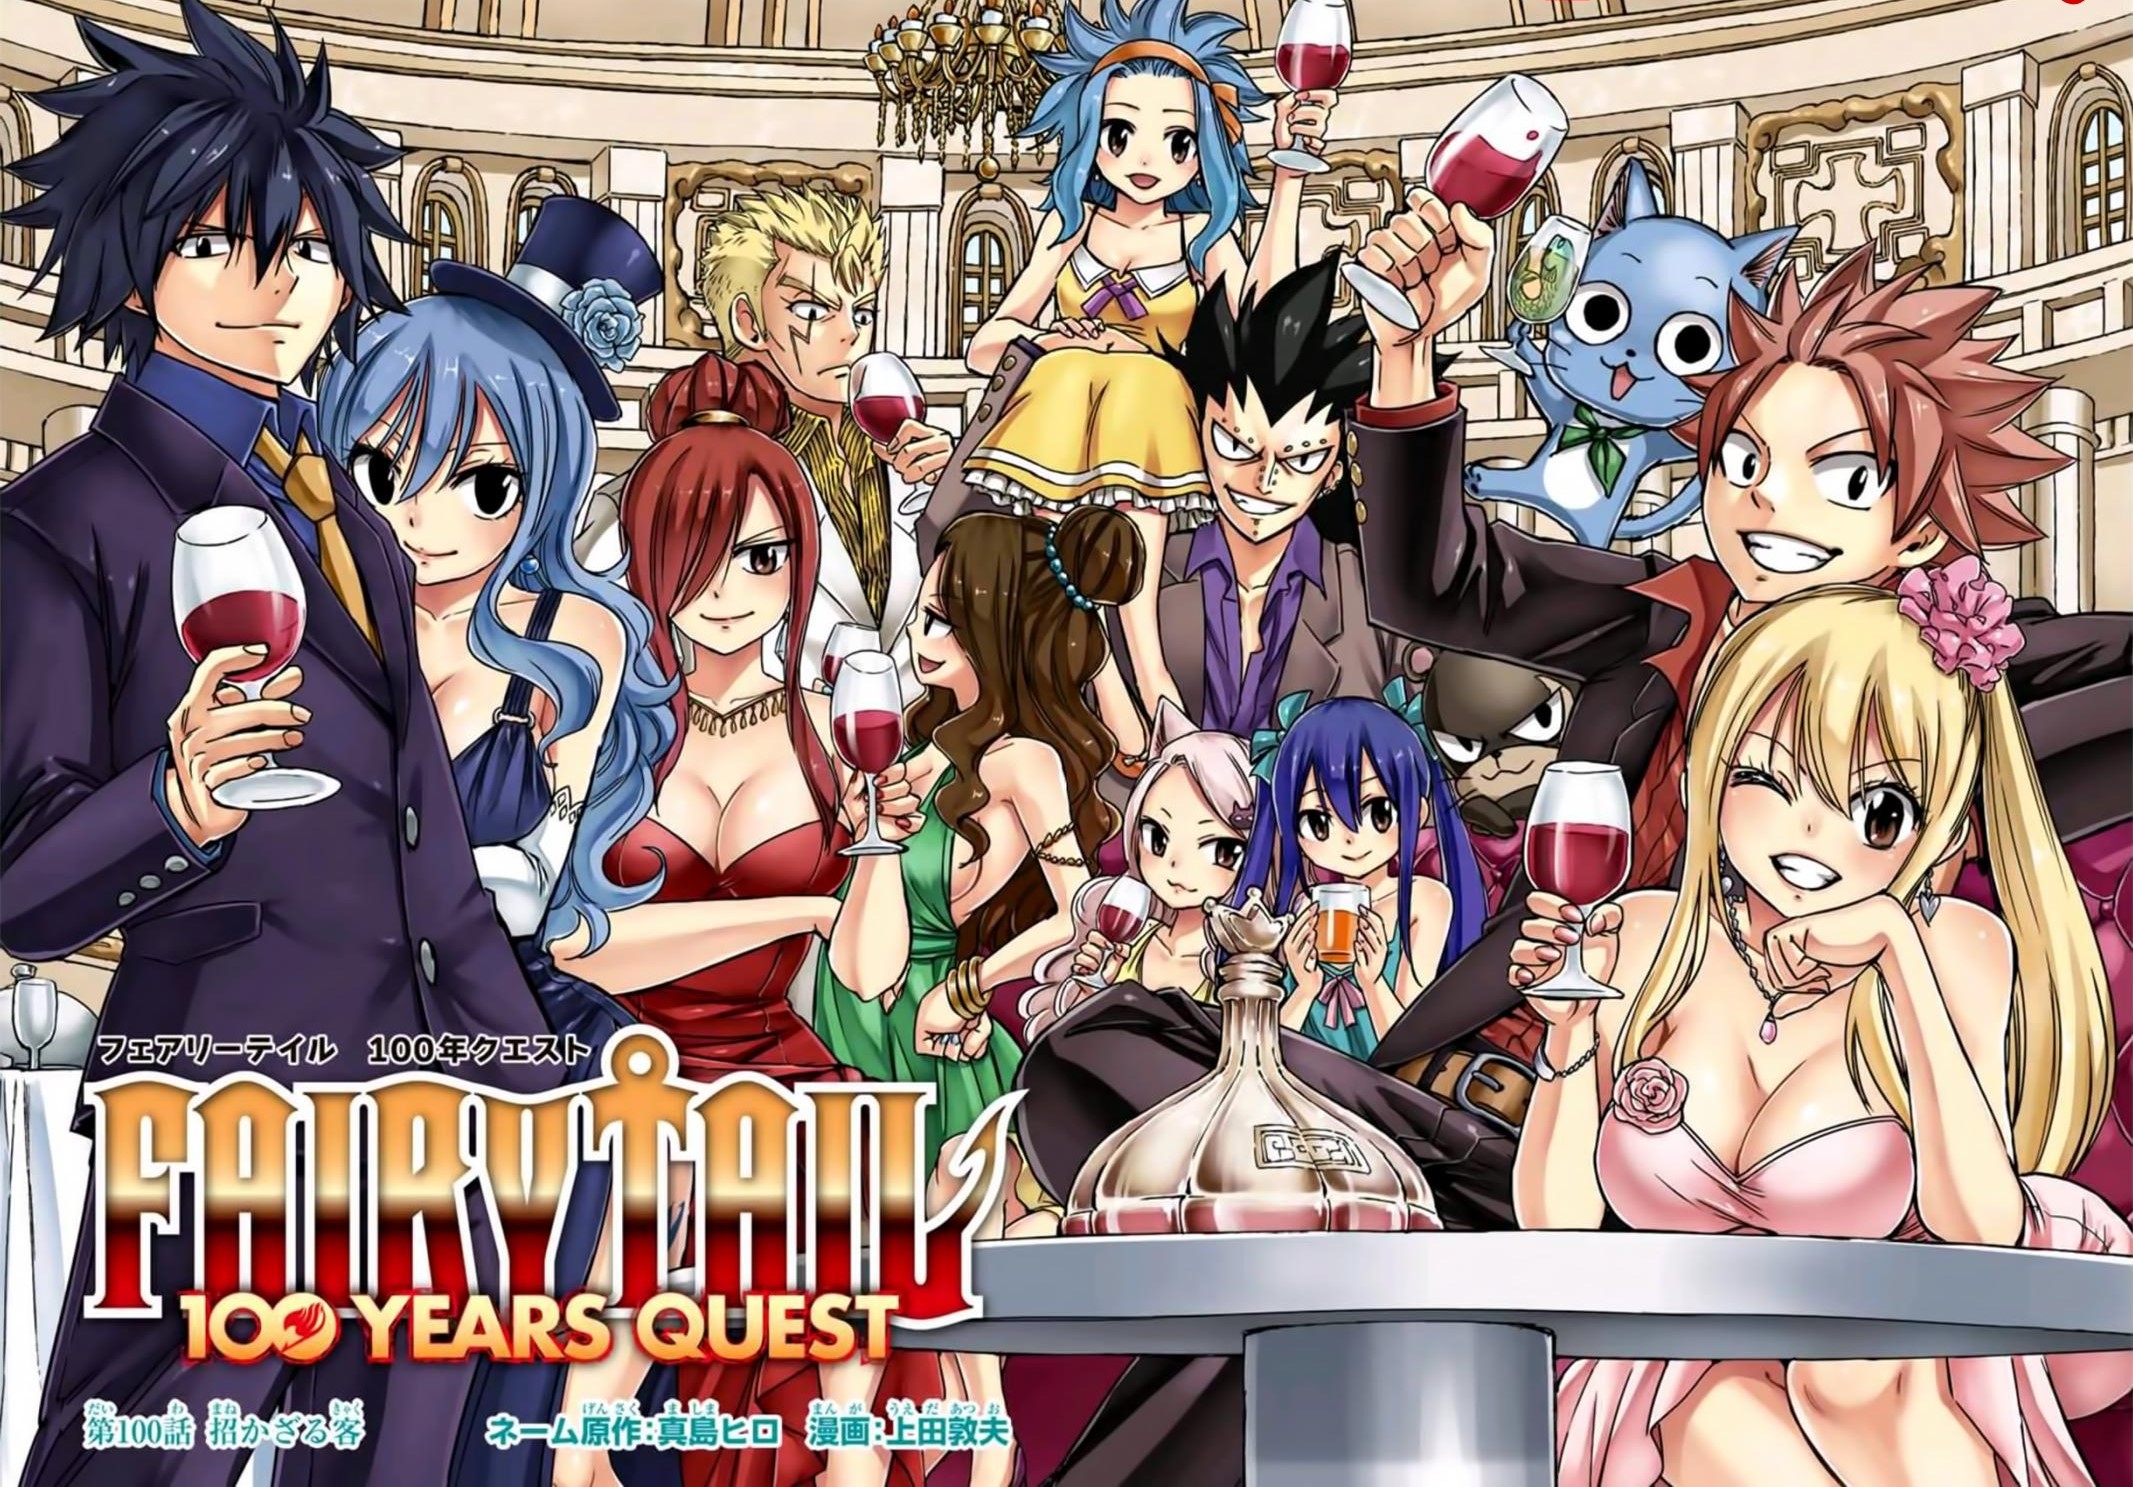 Anime Like Fairy Tail | 20 Must See Anime Similar to Fairy Tail